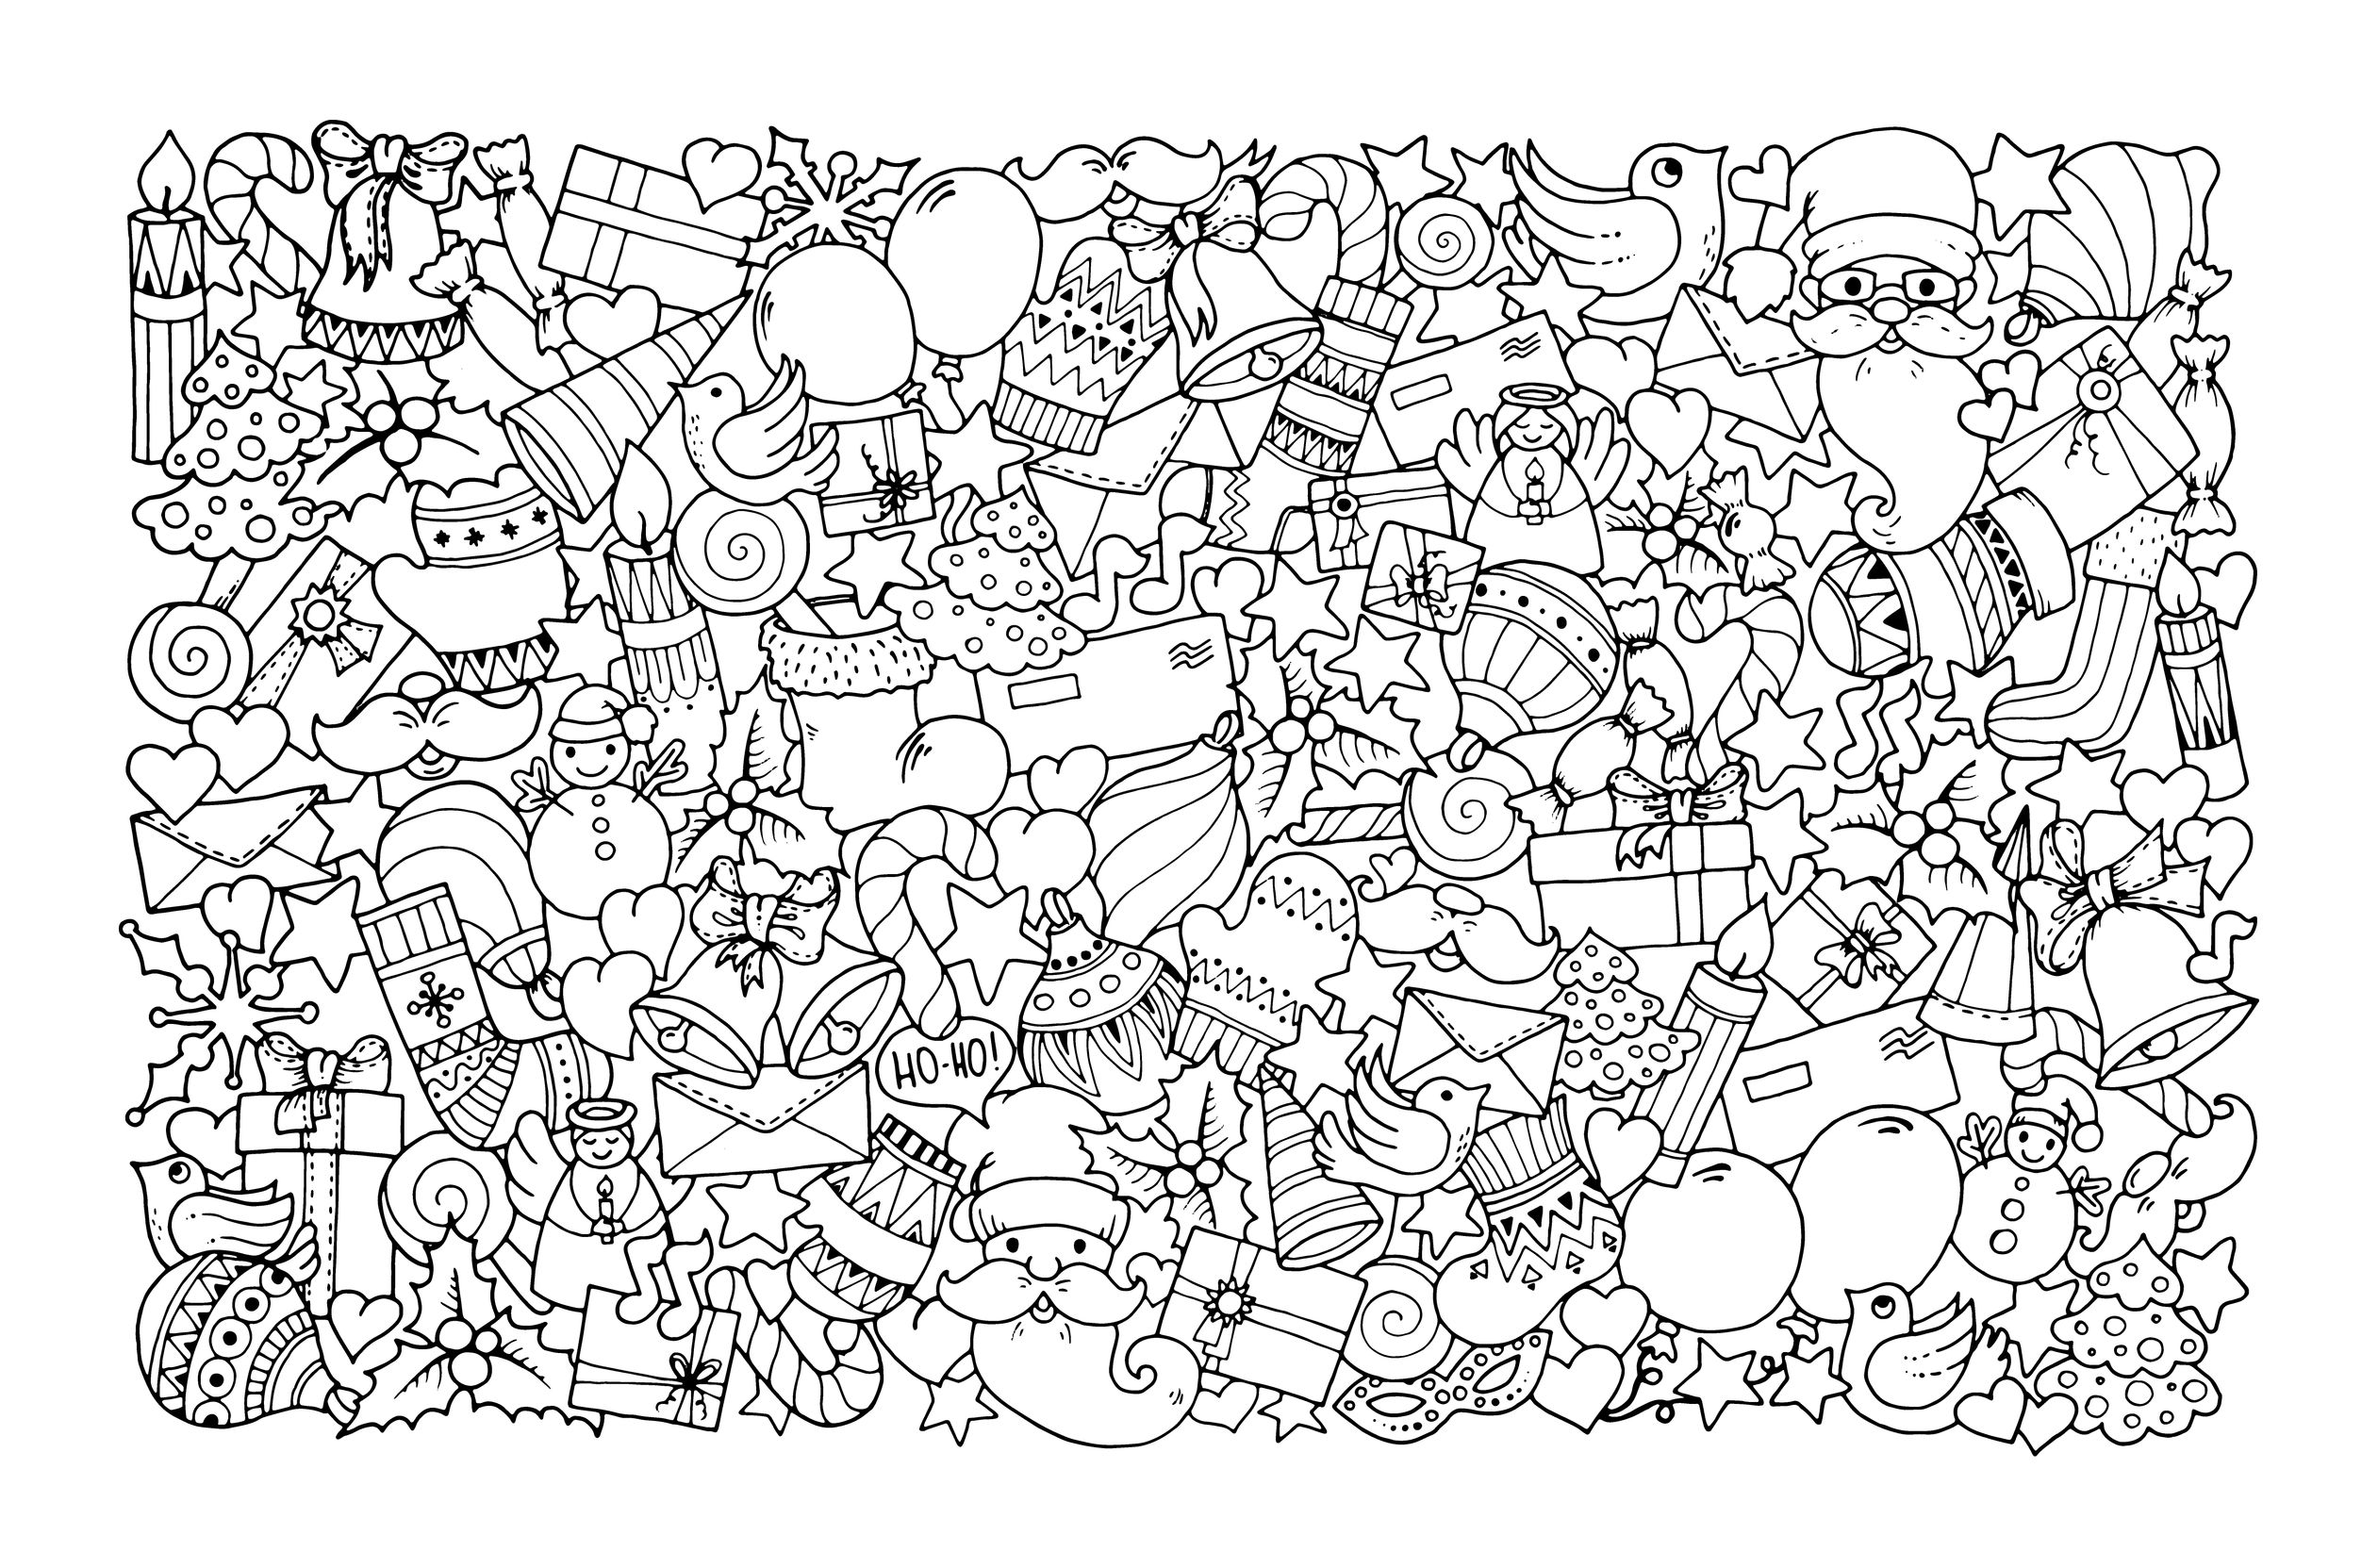 smalltalkwitht-download-christmas-coloring-pages-online-gif